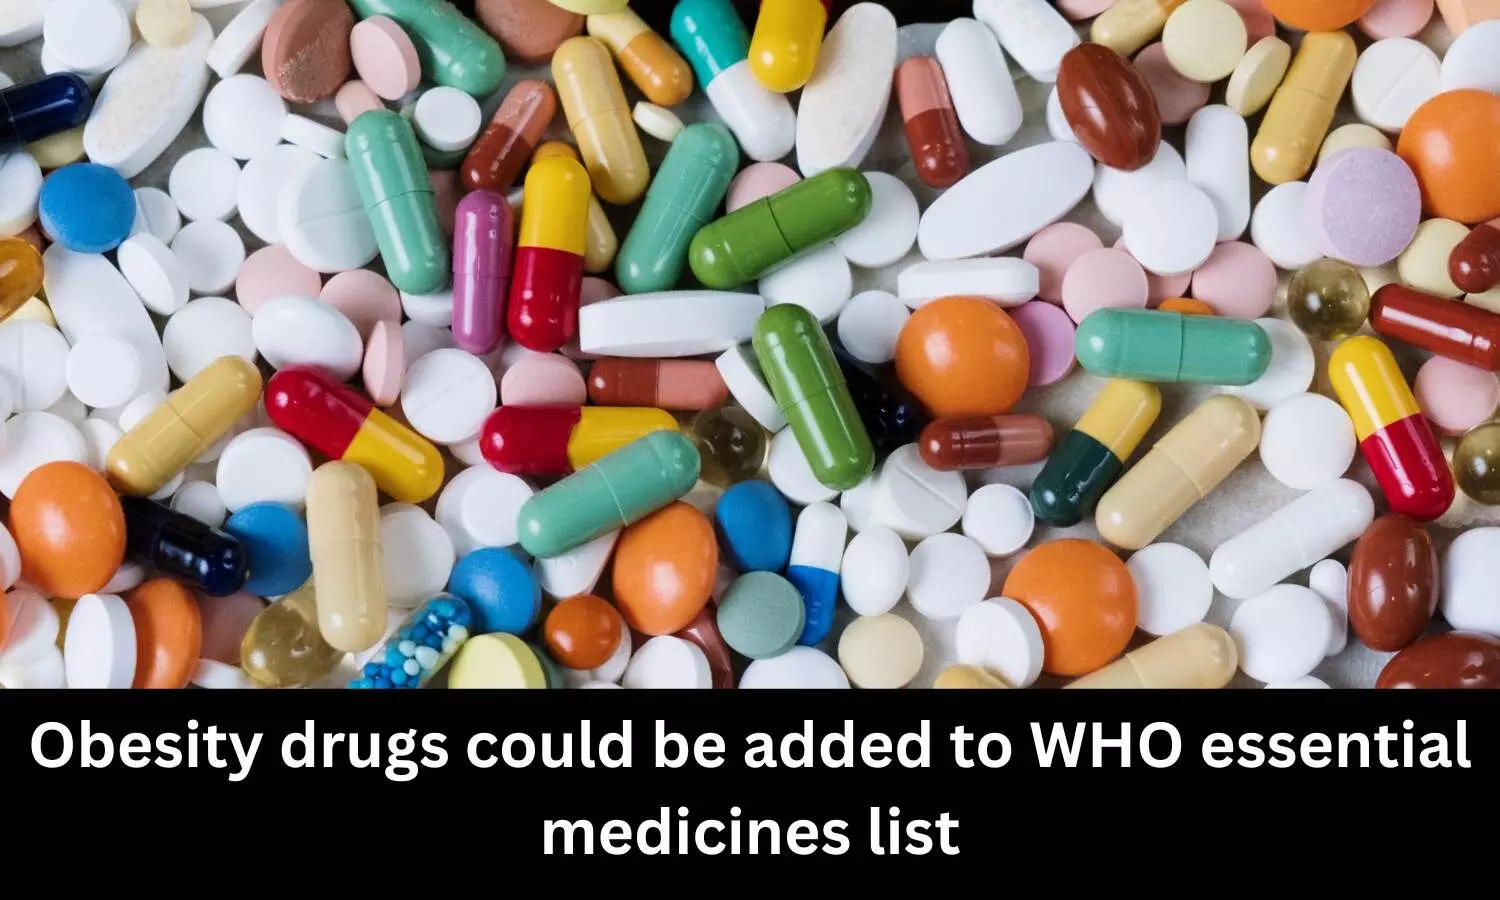 Obesity drugs could be included on WHO essential medicines list